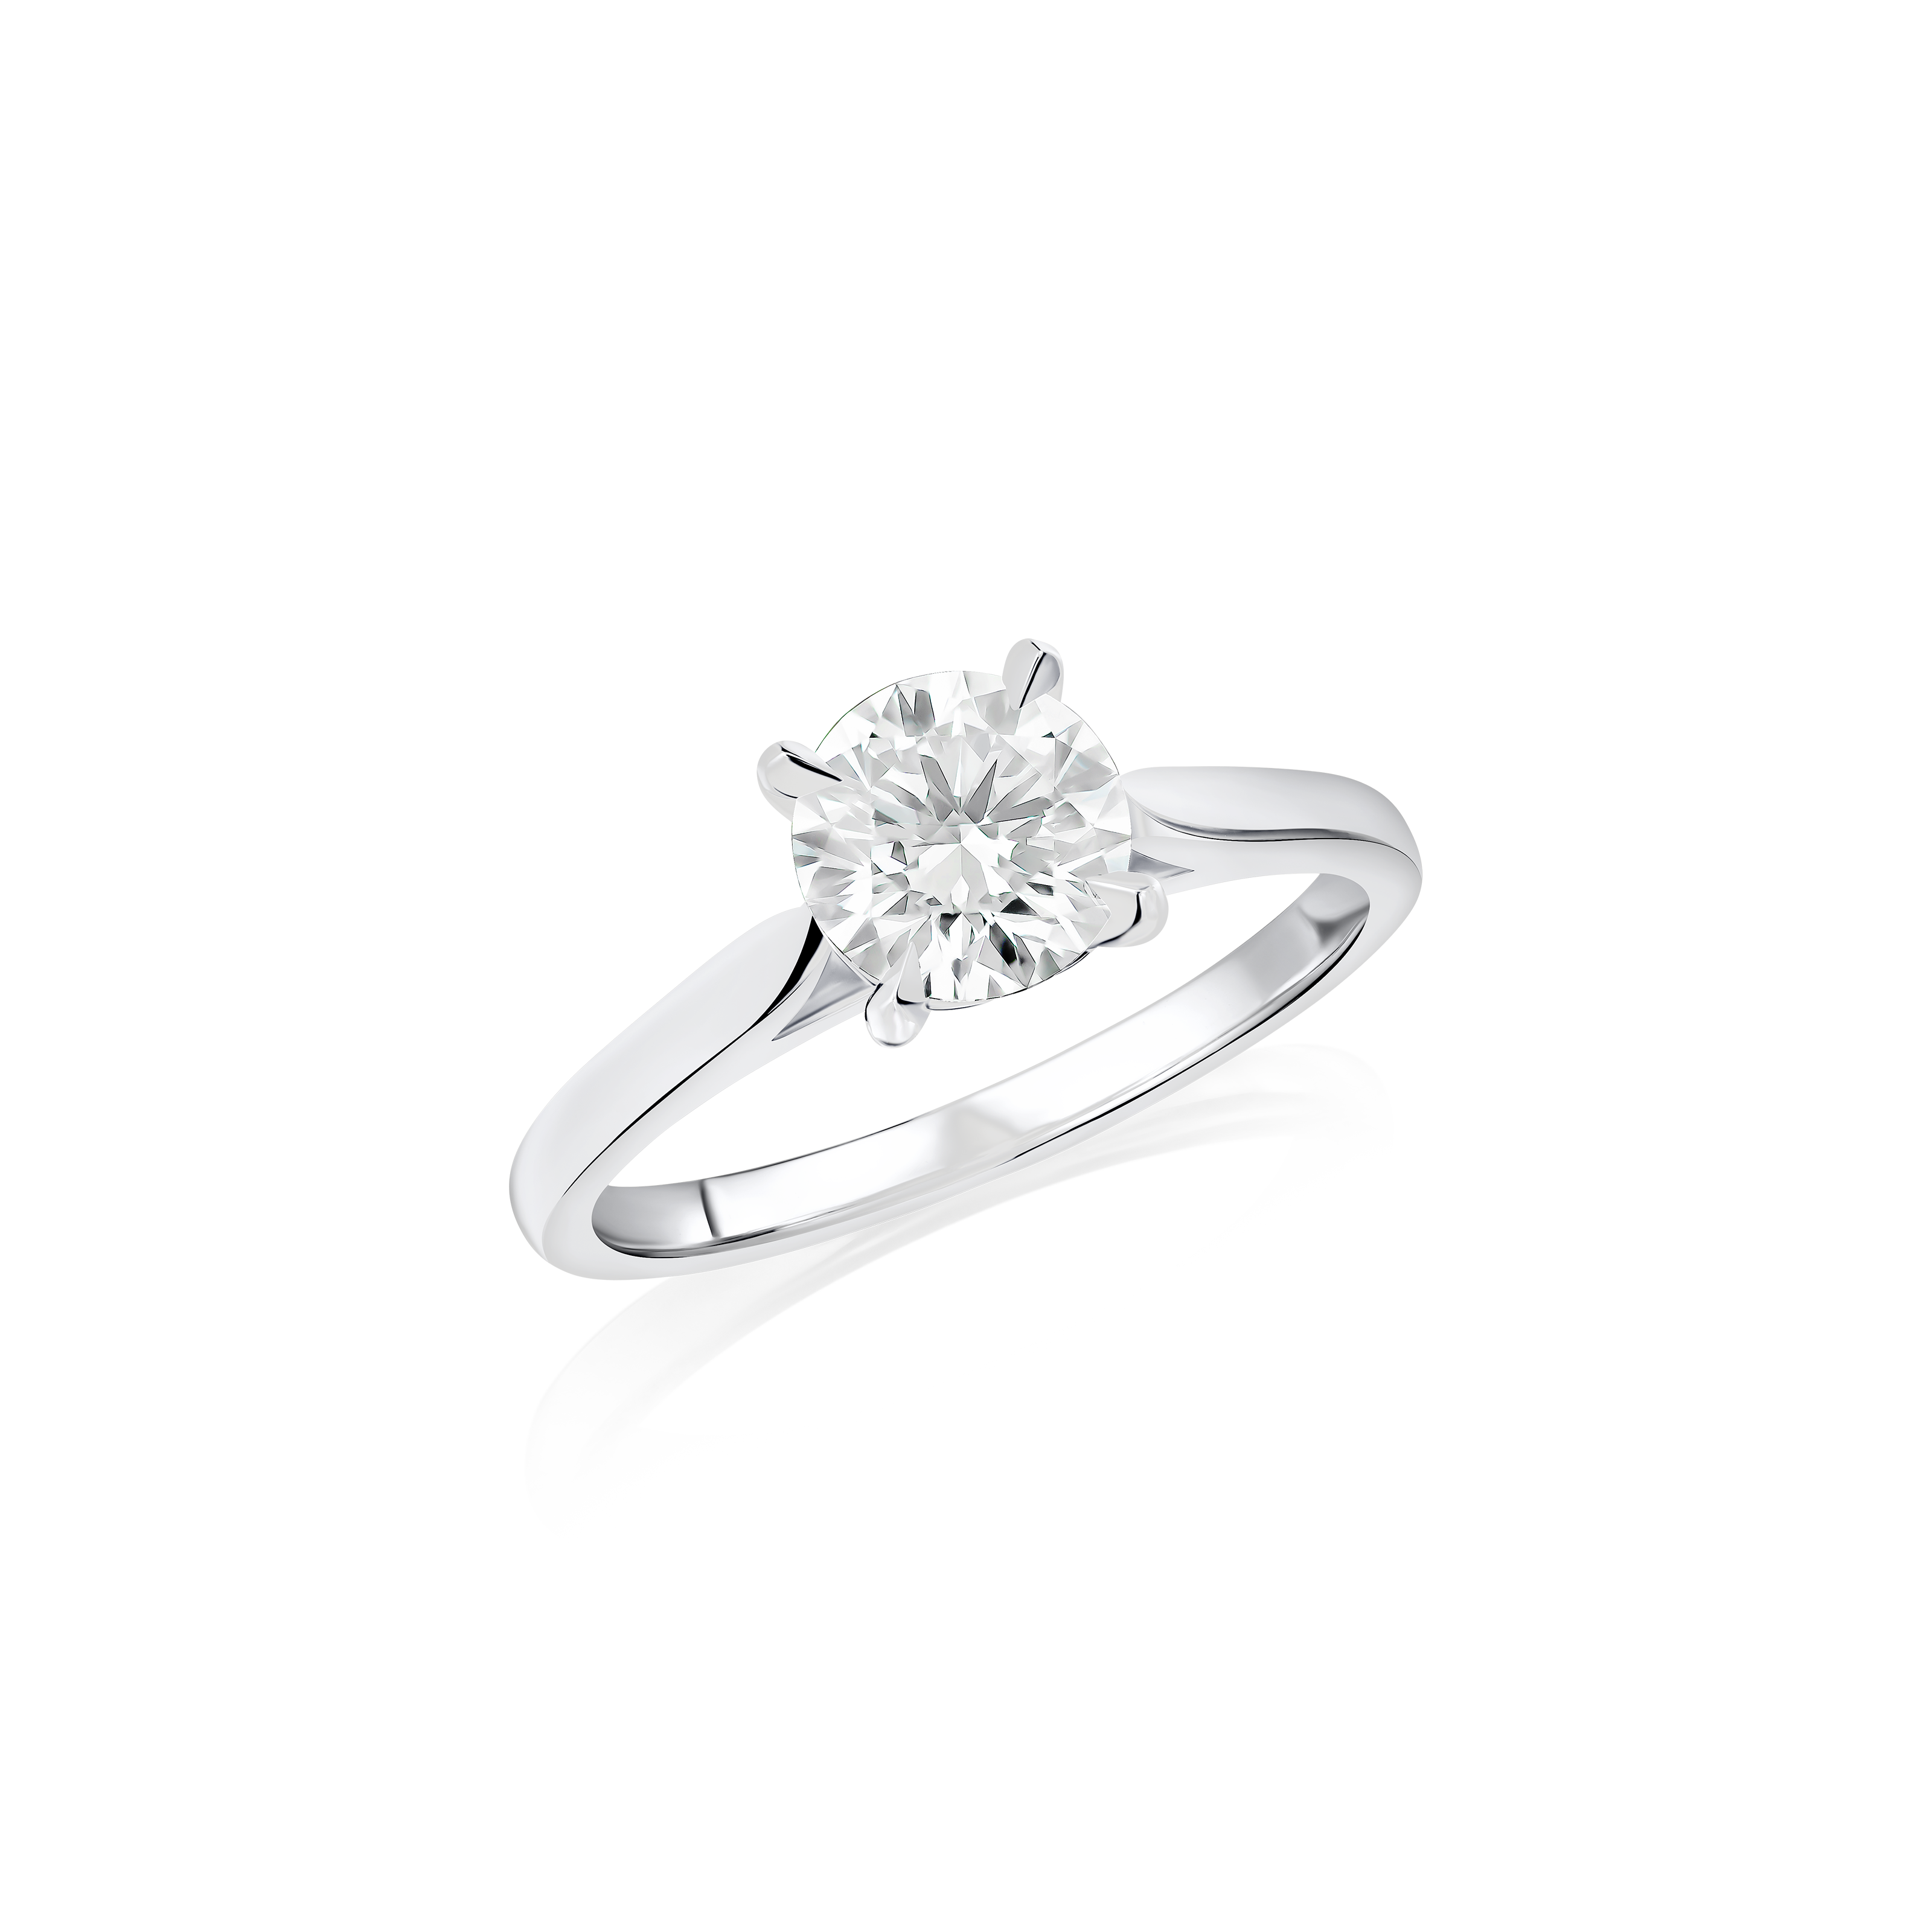 1.00cts Round Brilliant-Cut Diamond Solitaire Engagement Ring